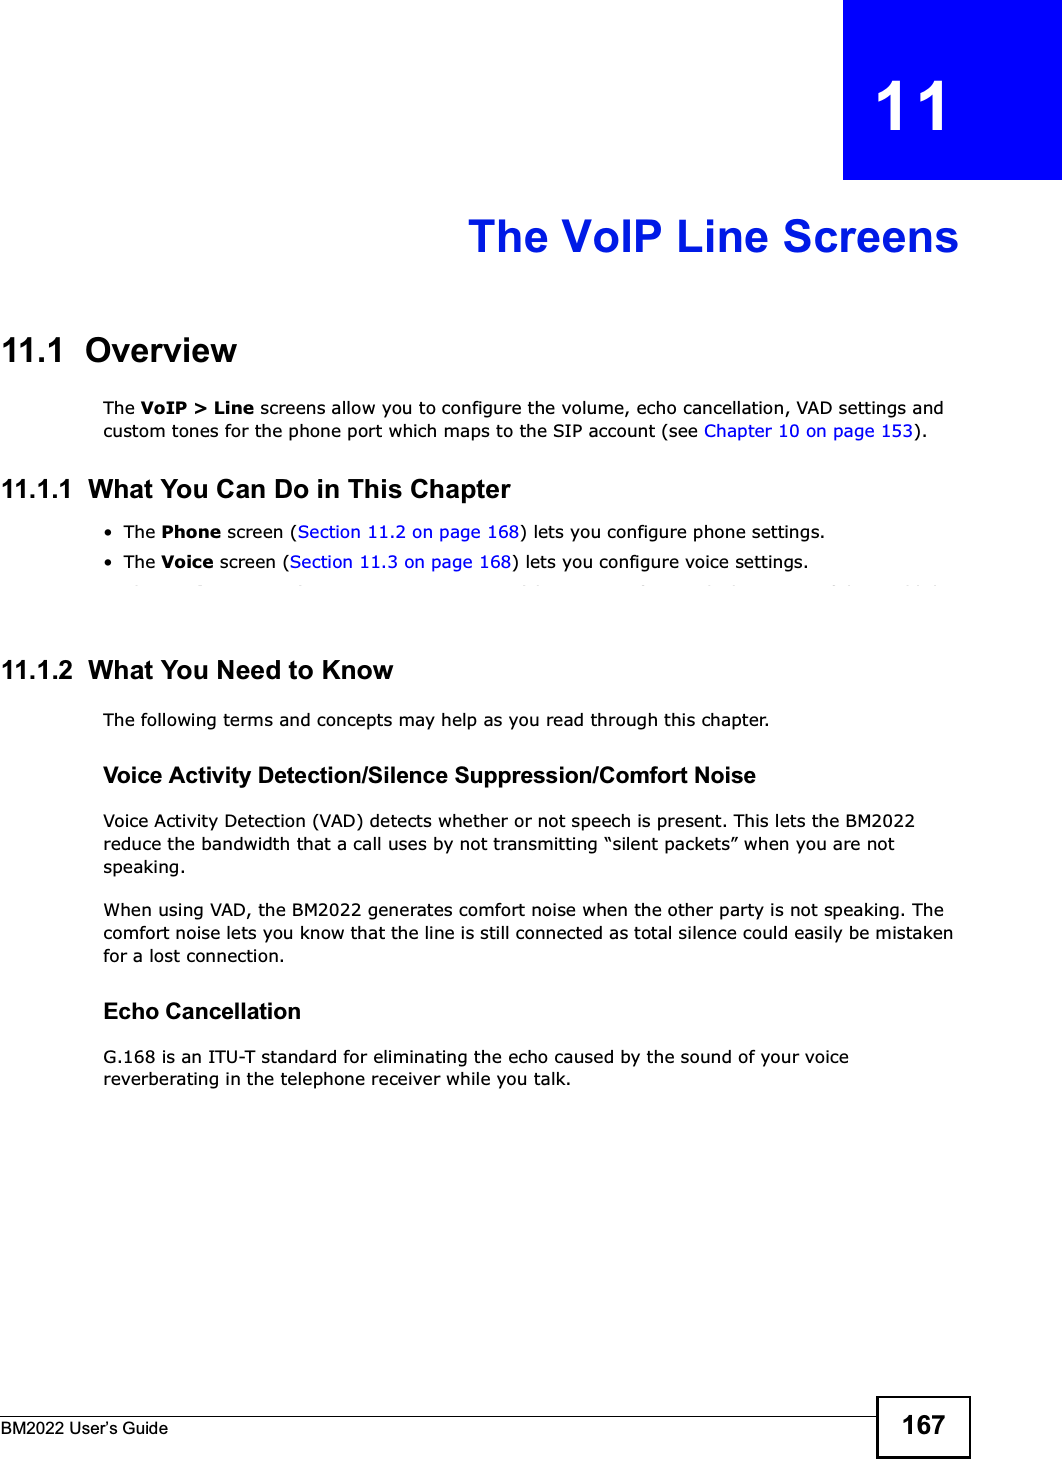 BM2022 Users Guide 167CHAPTER   11The VoIP Line Screens11.1  OverviewThe VoIP &gt; Line screens allow you to configure the volume, echo cancellation, VAD settings and custom tones for the phone port which maps to the SIP account (see Chapter 10 on page 153).11.1.1  What You Can Do in This ChapterThe Phone screen (Section 11.2 on page 168) lets you configure phone settings.The Voice screen (Section 11.3 on page 168) lets you configure voice settings.The Region screen (Section 11.4 on page 169) lets you configure which country of the world the BM2022 is in.11.1.2  What You Need to KnowThe following terms and concepts may help as you read through this chapter.Voice Activity Detection/Silence Suppression/Comfort NoiseVoice Activity Detection (VAD) detects whether or not speech is present. This lets the BM2022 reduce the bandwidth that a call uses by not transmitting silent packets when you are not speaking.When using VAD, the BM2022 generates comfort noise when the other party is not speaking. The comfort noise lets you know that the line is still connected as total silence could easily be mistaken for a lost connection.Echo Cancellation G.168 is an ITU-T standard for eliminating the echo caused by the sound of your voice reverberating in the telephone receiver while you talk.